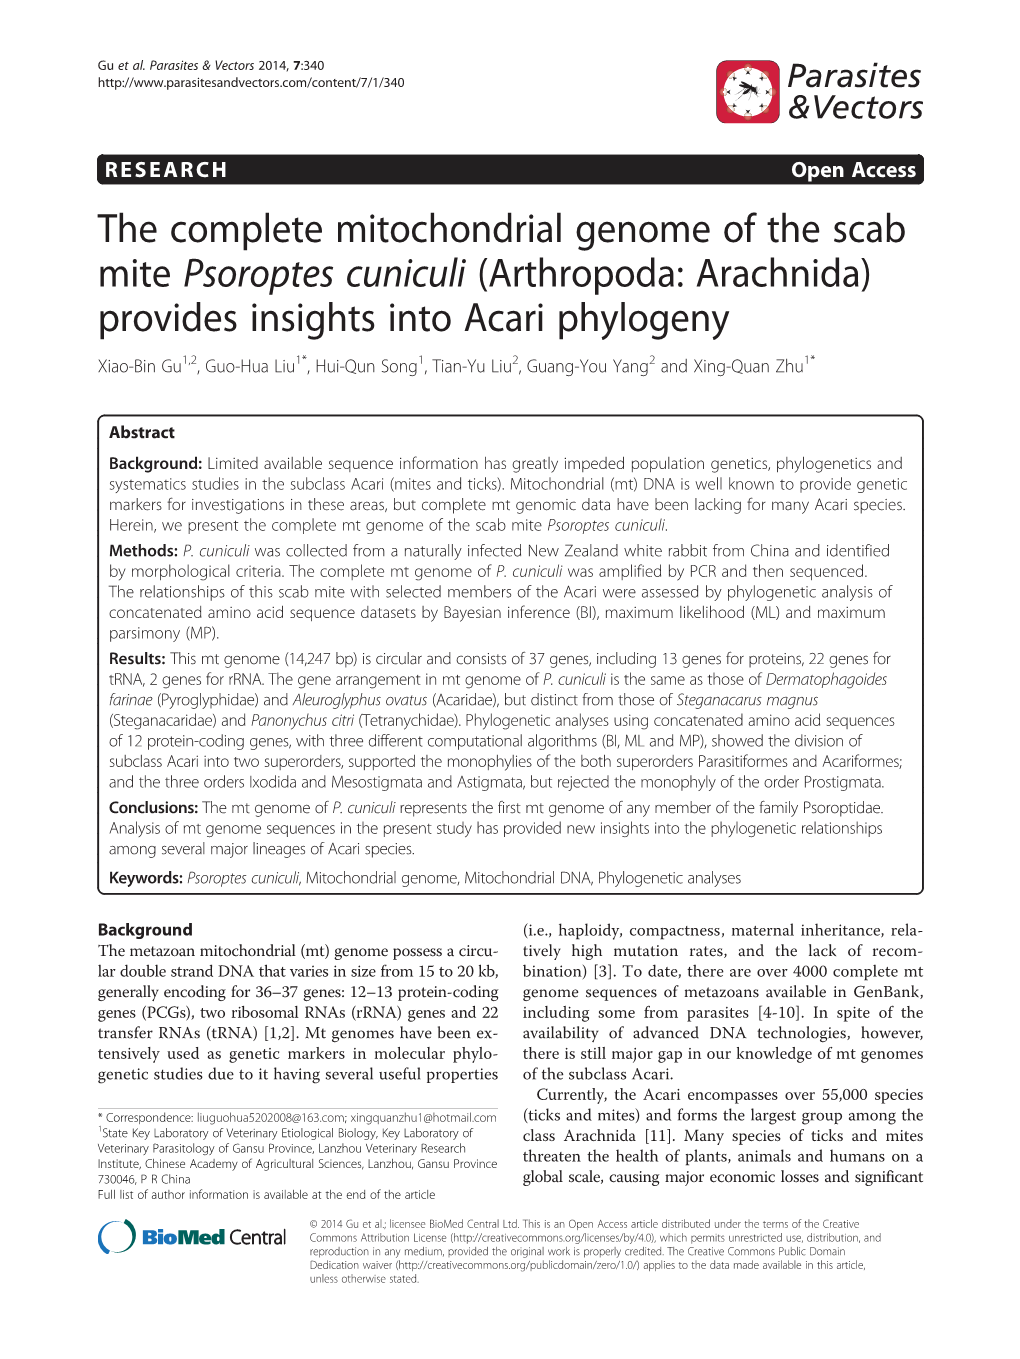 The Complete Mitochondrial Genome of the Scab Mite